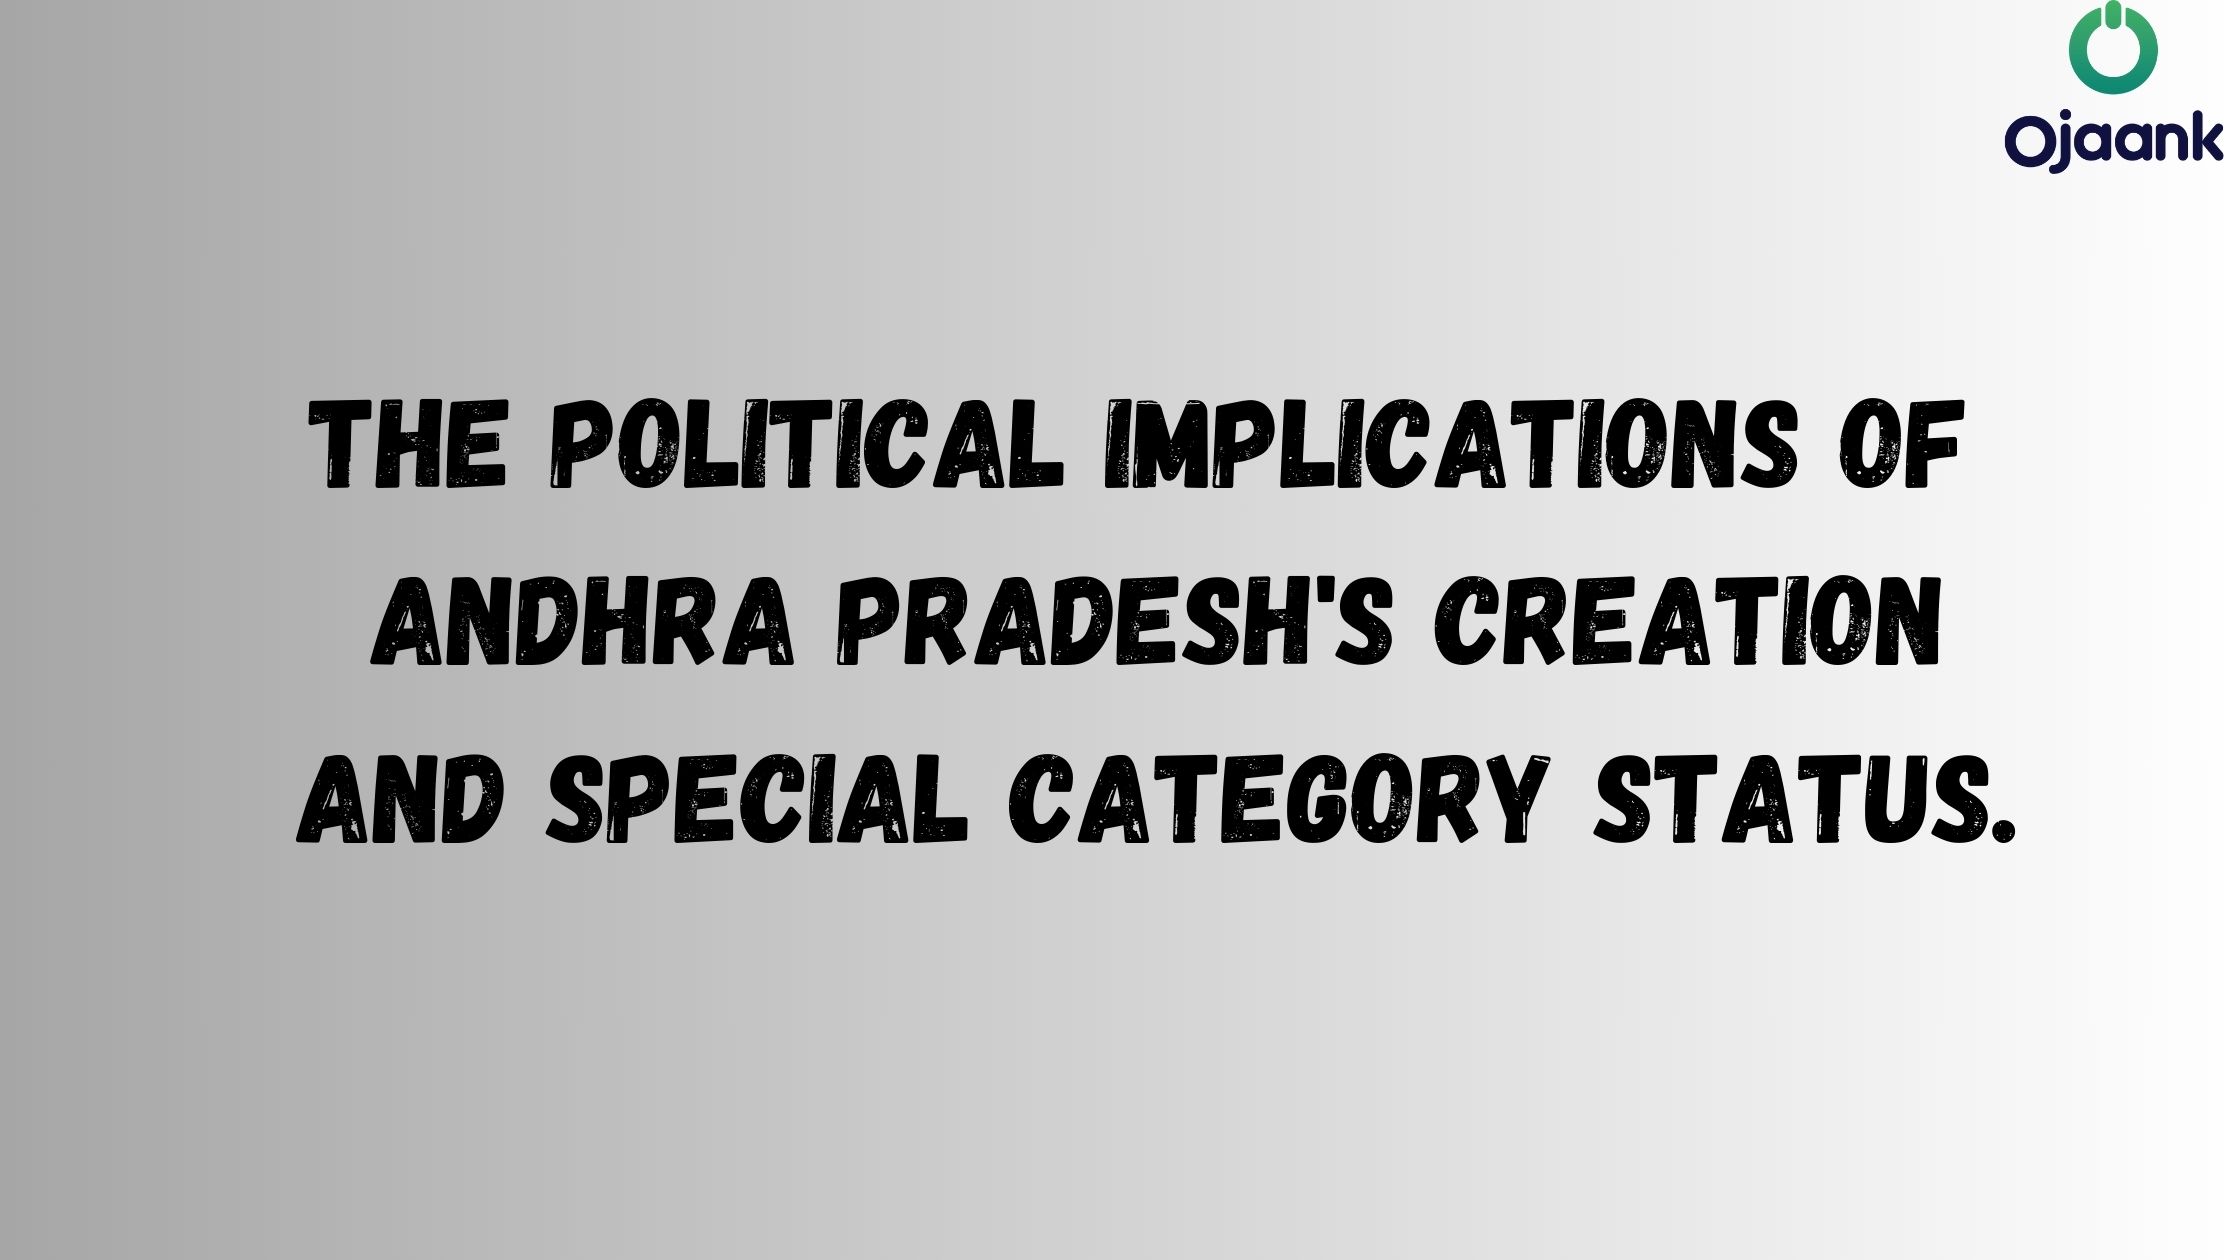 The Political Implications of Andhra Pradesh's Creation and Special Category Status